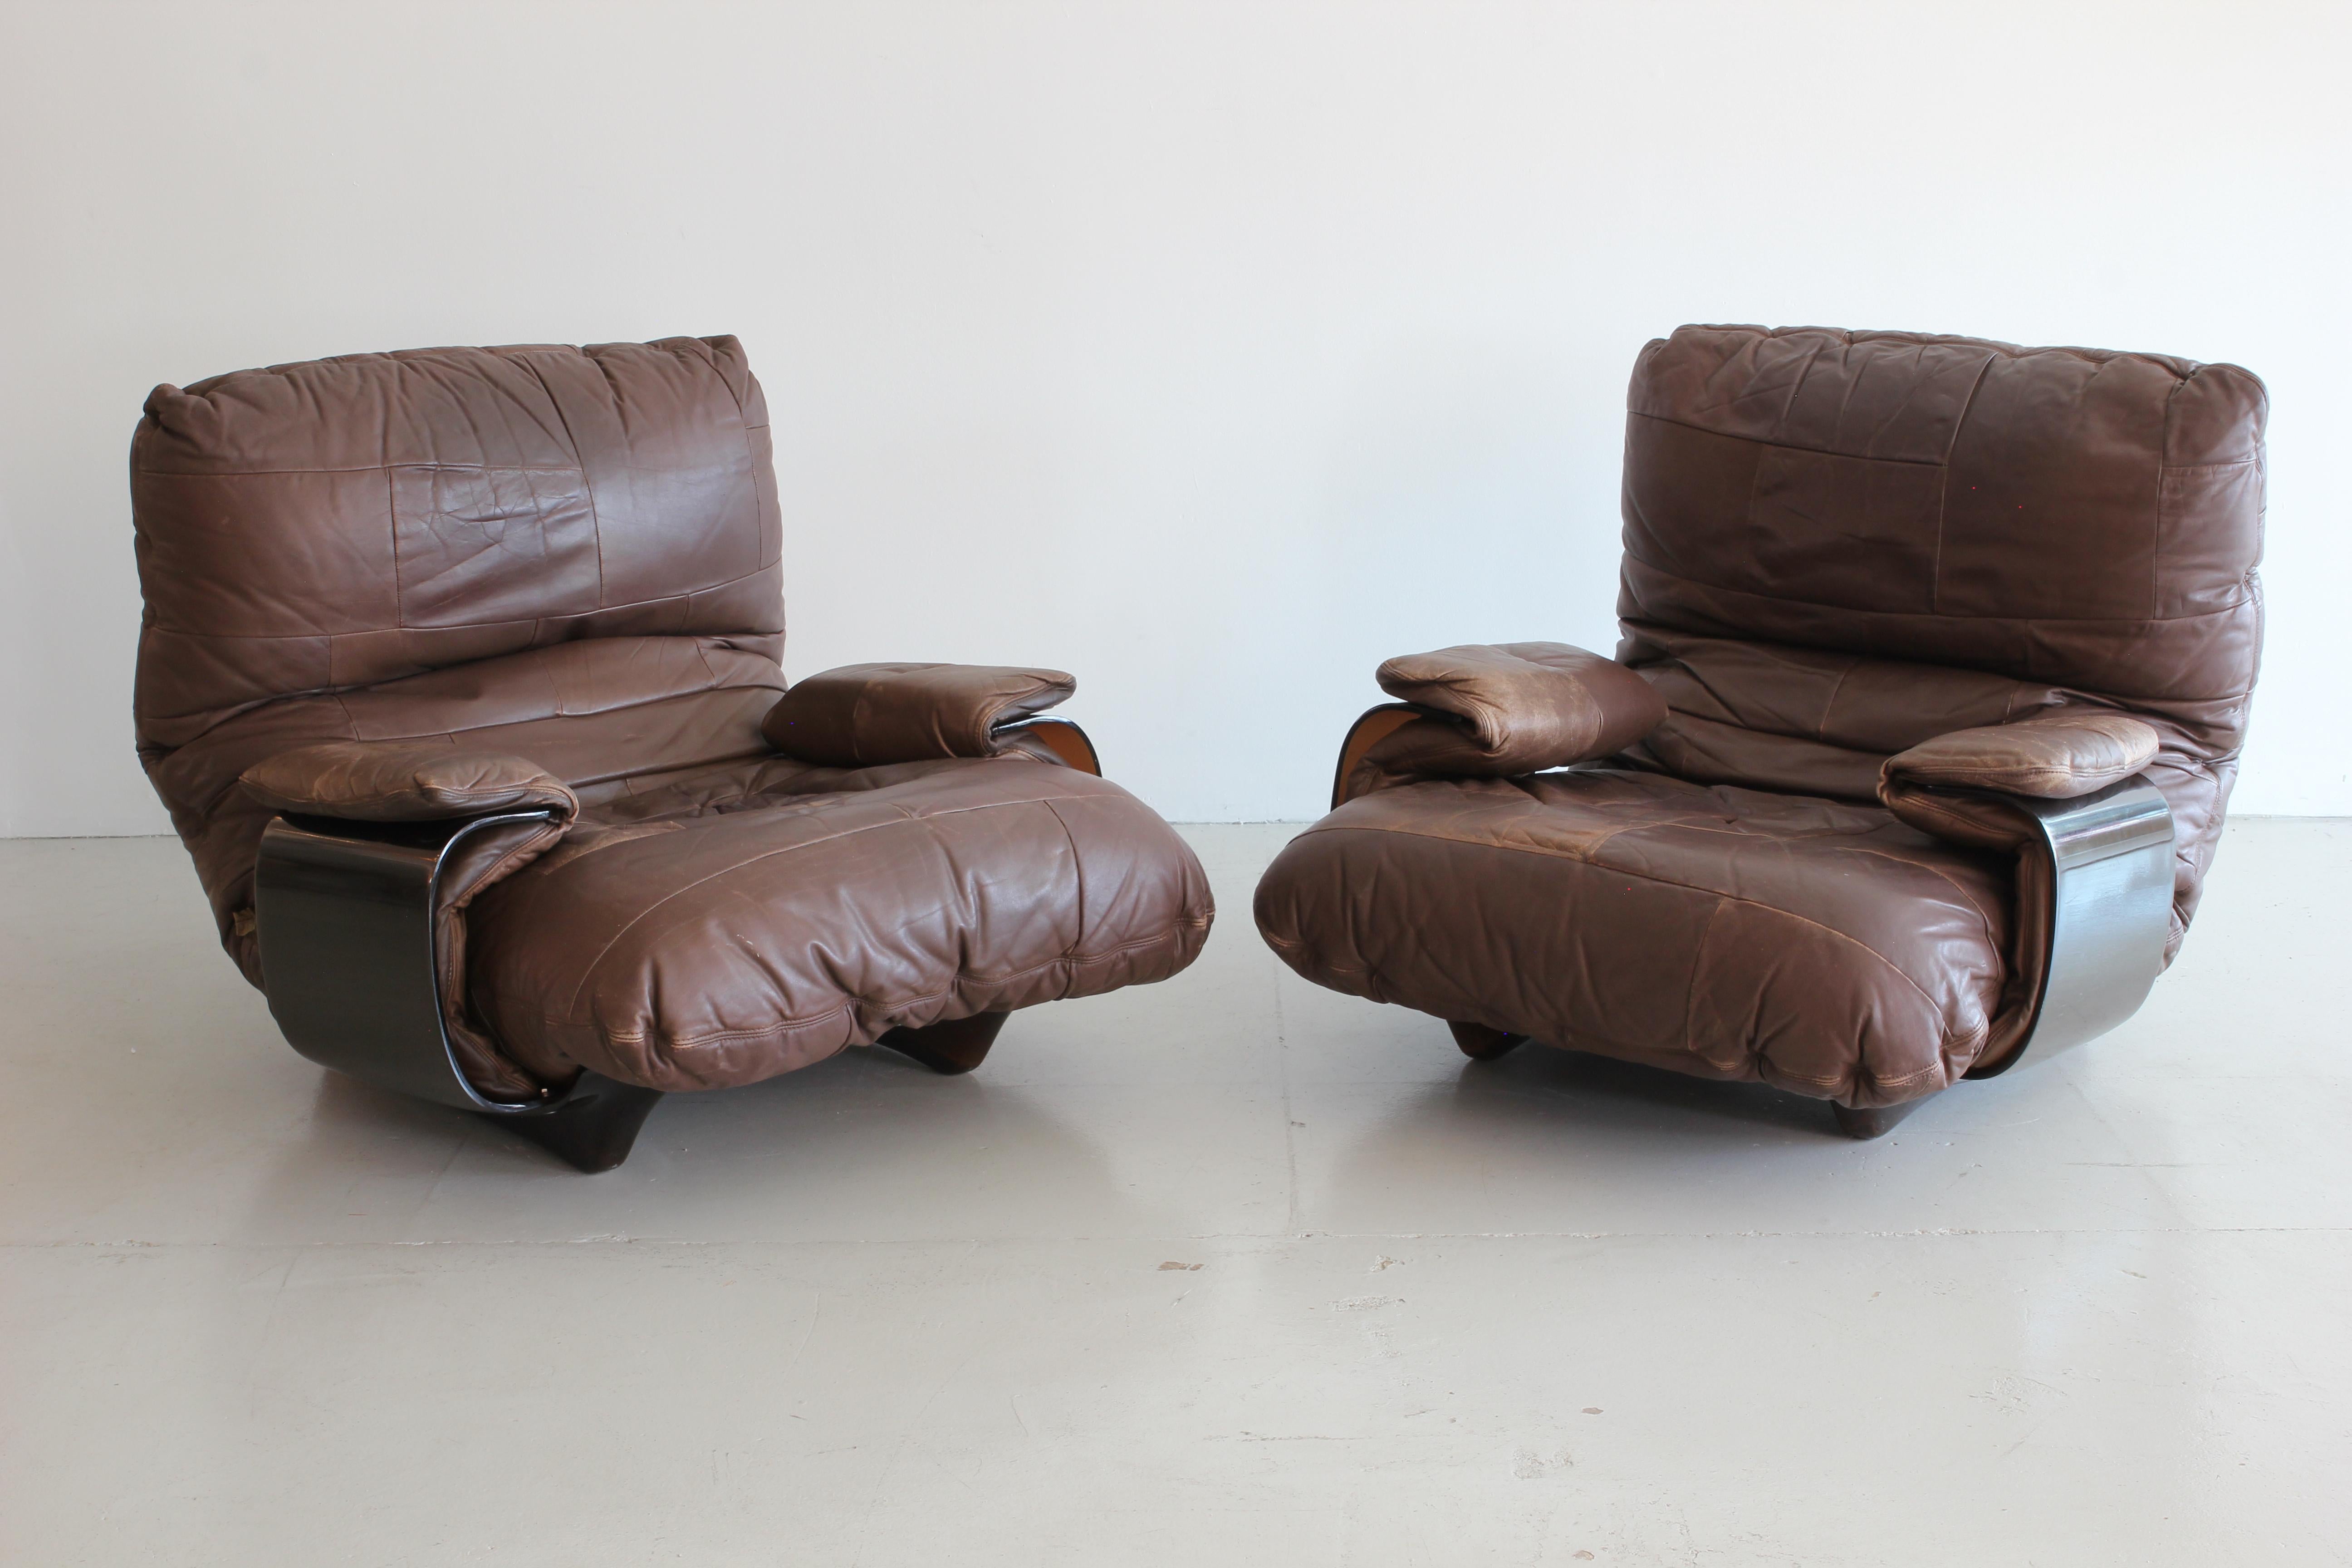 Pair of incredible Marsala lounge chairs by Michel Ducaroy manufactured by Ligne Roset in France during the 1970s. Original leather and logo on upholstery and frame. Sold as a pair.